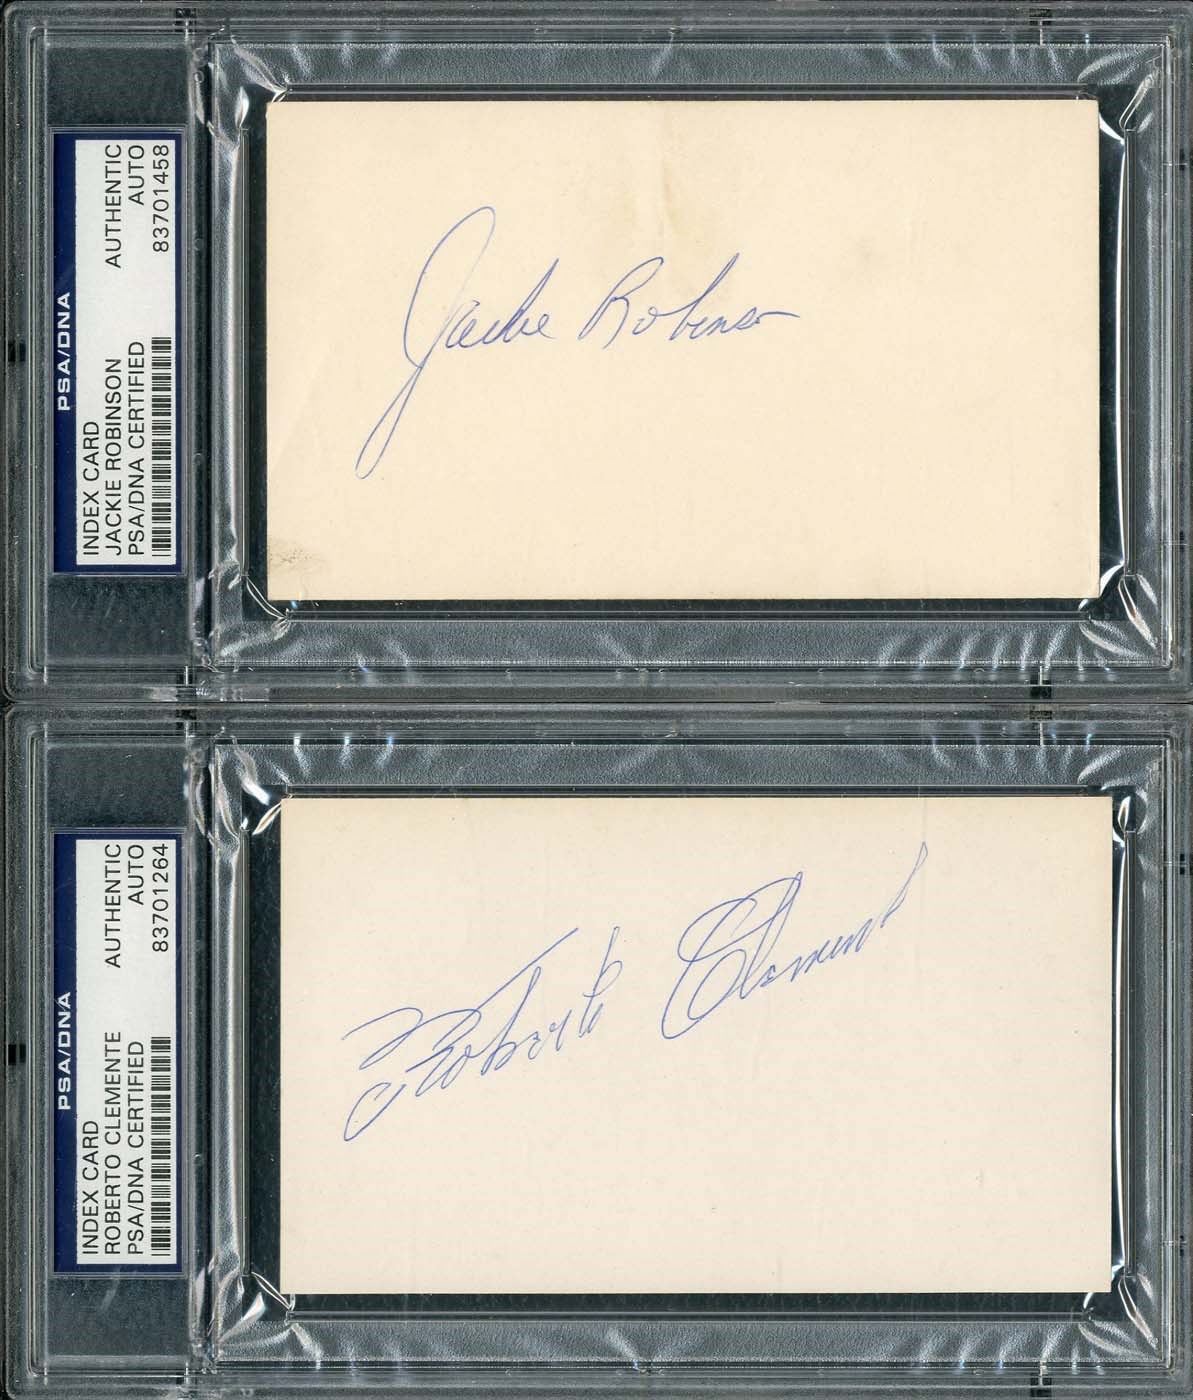 Jackie Robinson & Roberto Clemente Signed Index Cards (PSA/DNA)